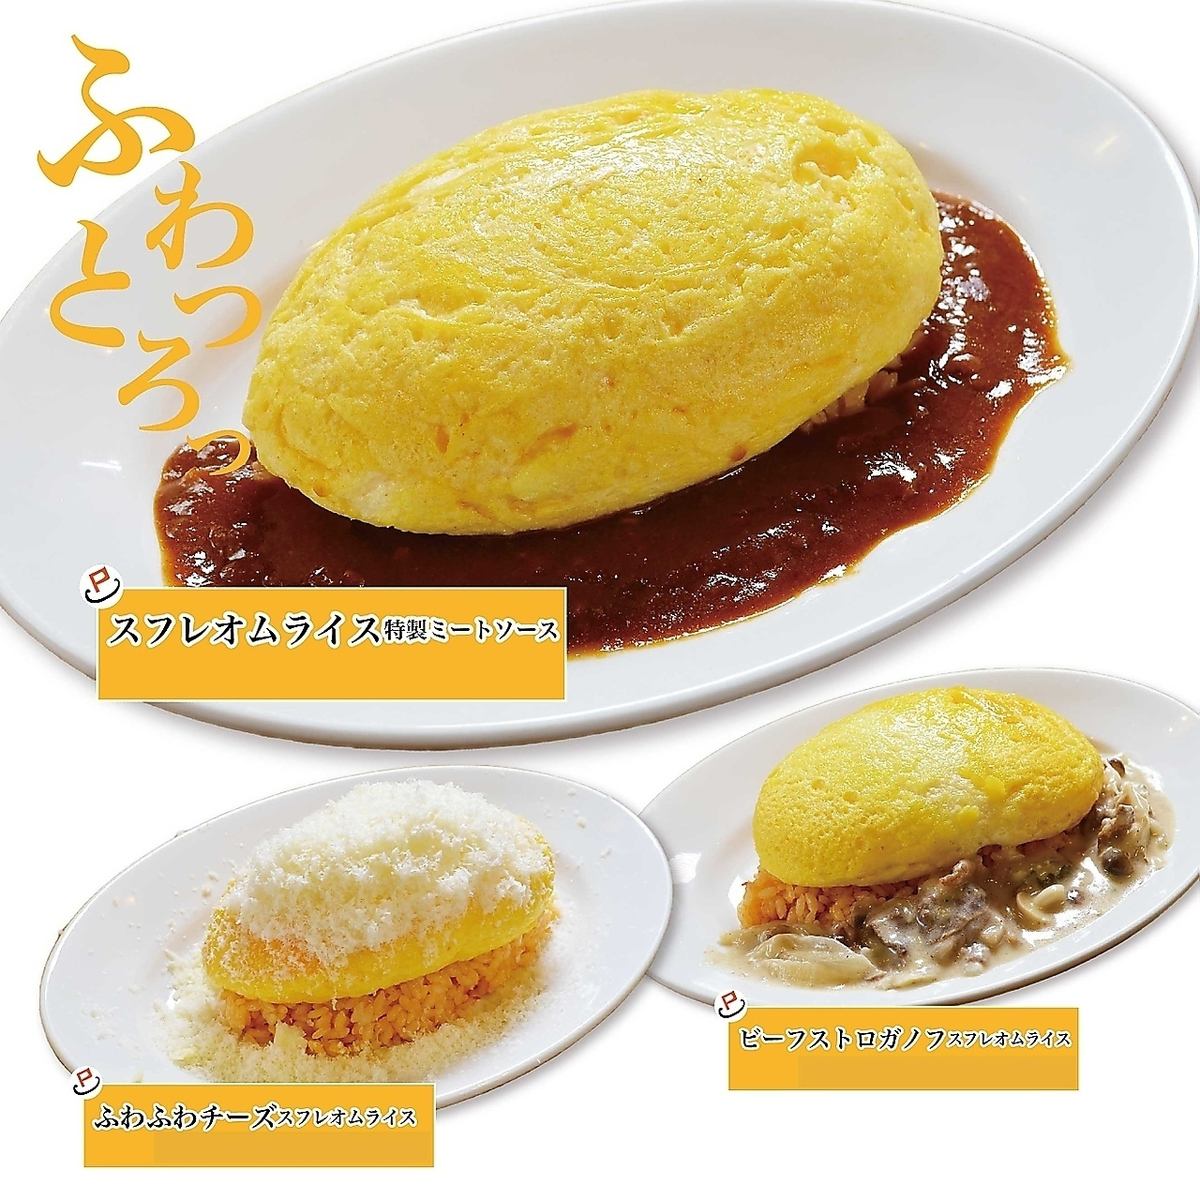 Omelet rice and Neapolitan cream soda are very popular with children!